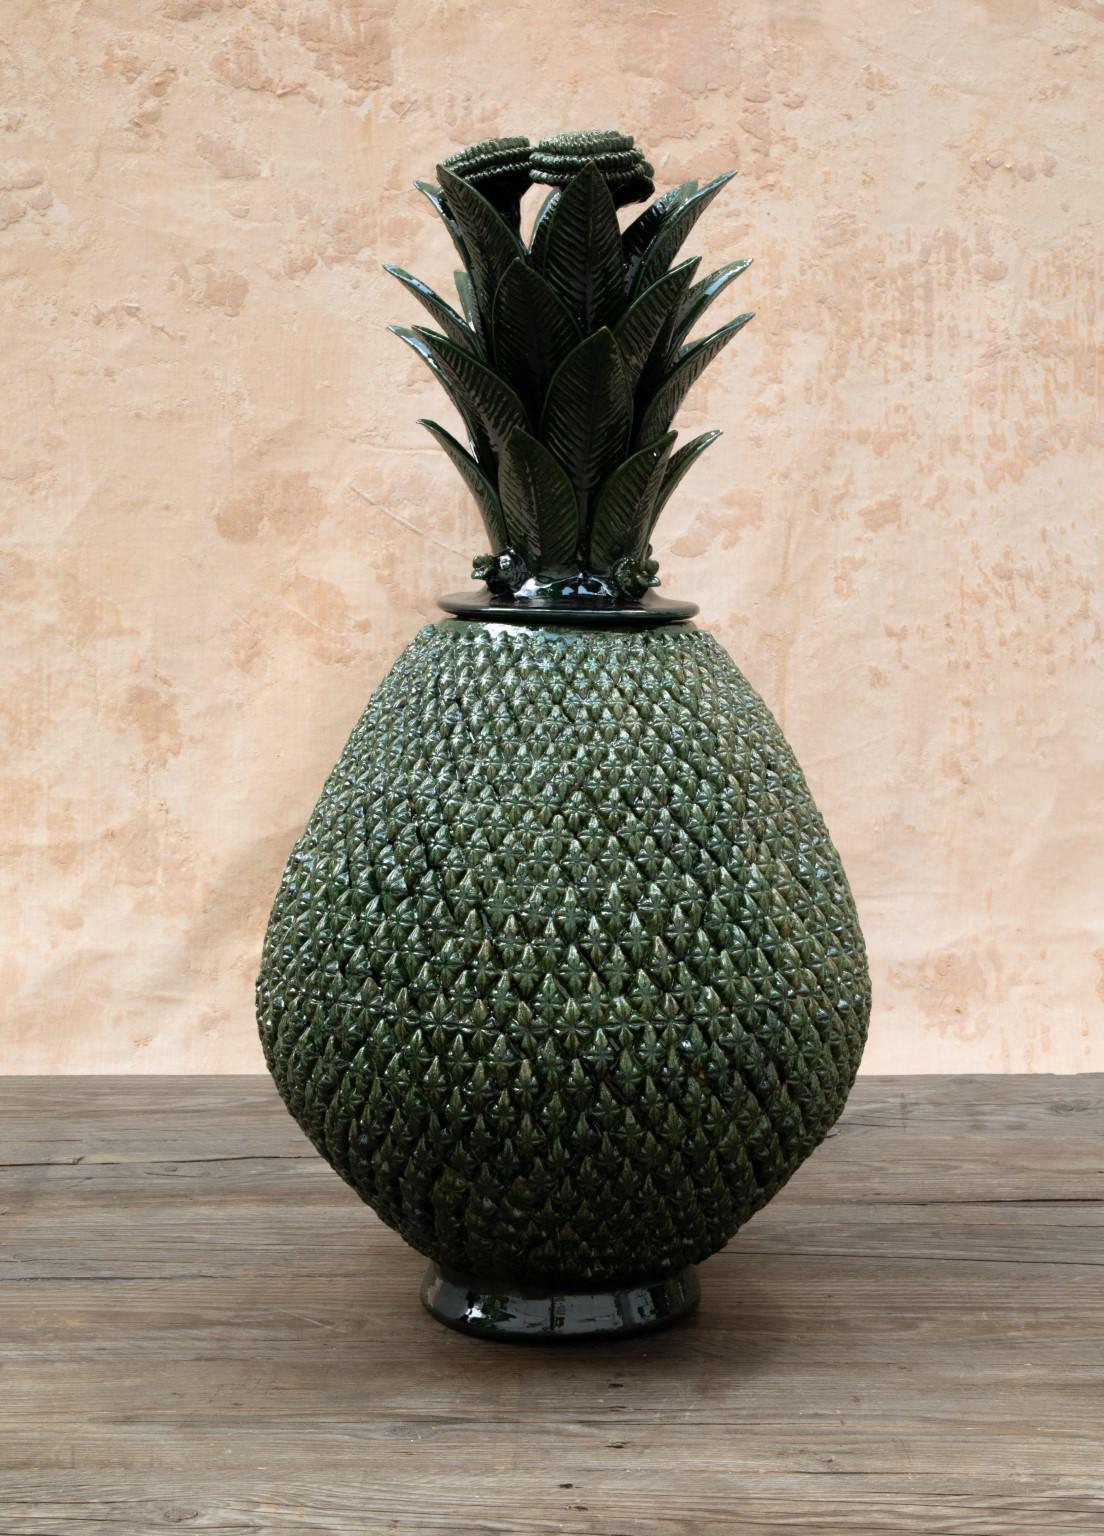 Piña Michoacana by Onora
Dimensions: W 47 x H 78 cm
Materials: Clay, Glazed pottery

Hand sculpted clay, covered with a mineral based slip and burnished using a quartz stone. The “Circo Collection” is a reproduction of Herón Martínez Mendoza's